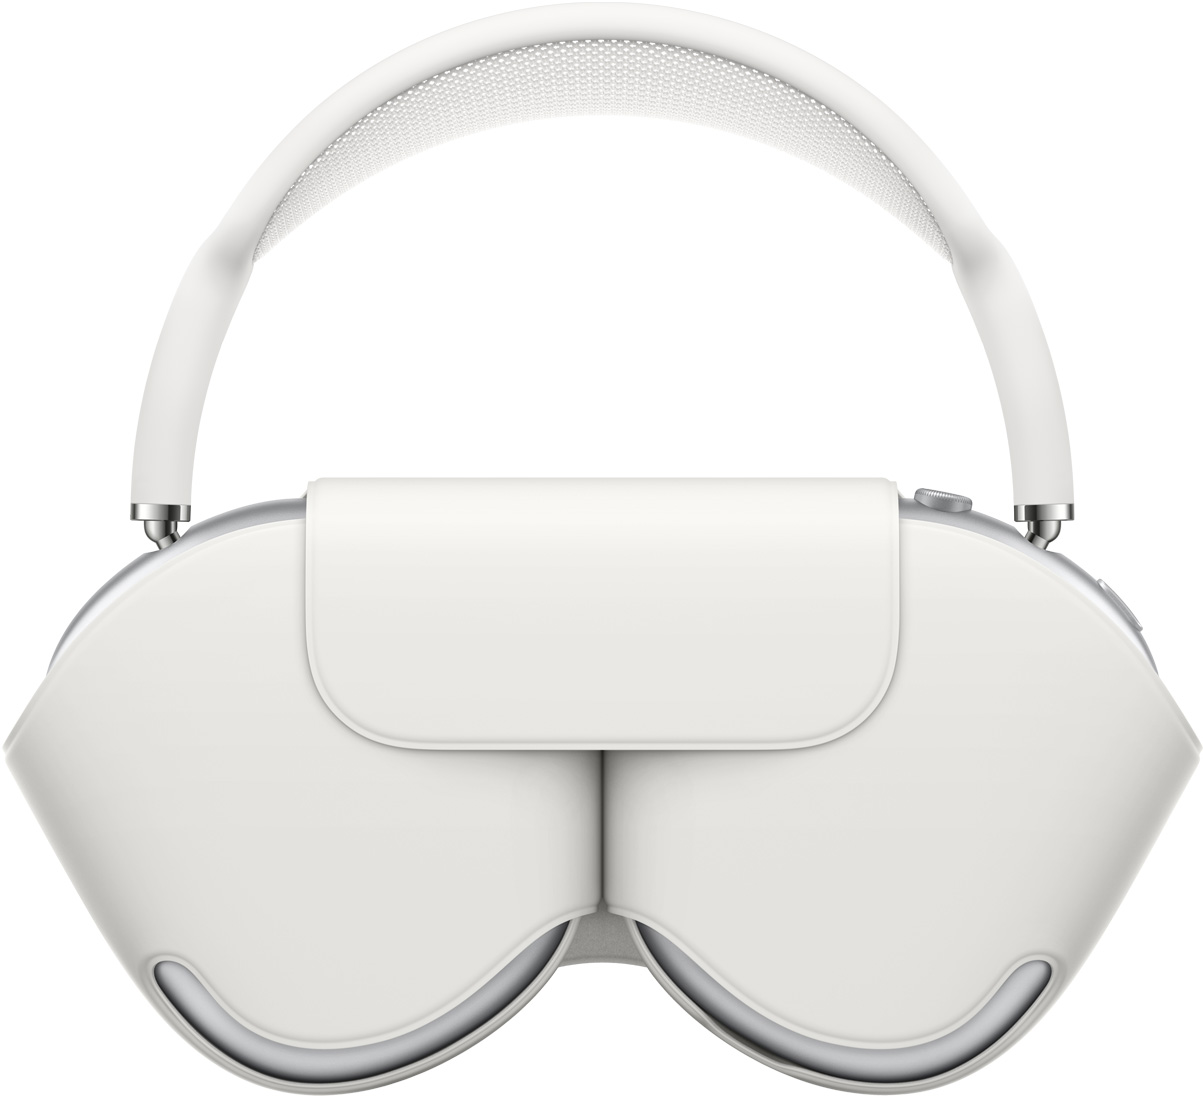 Smart Caseに収まったAirPods Maxを示す画像。